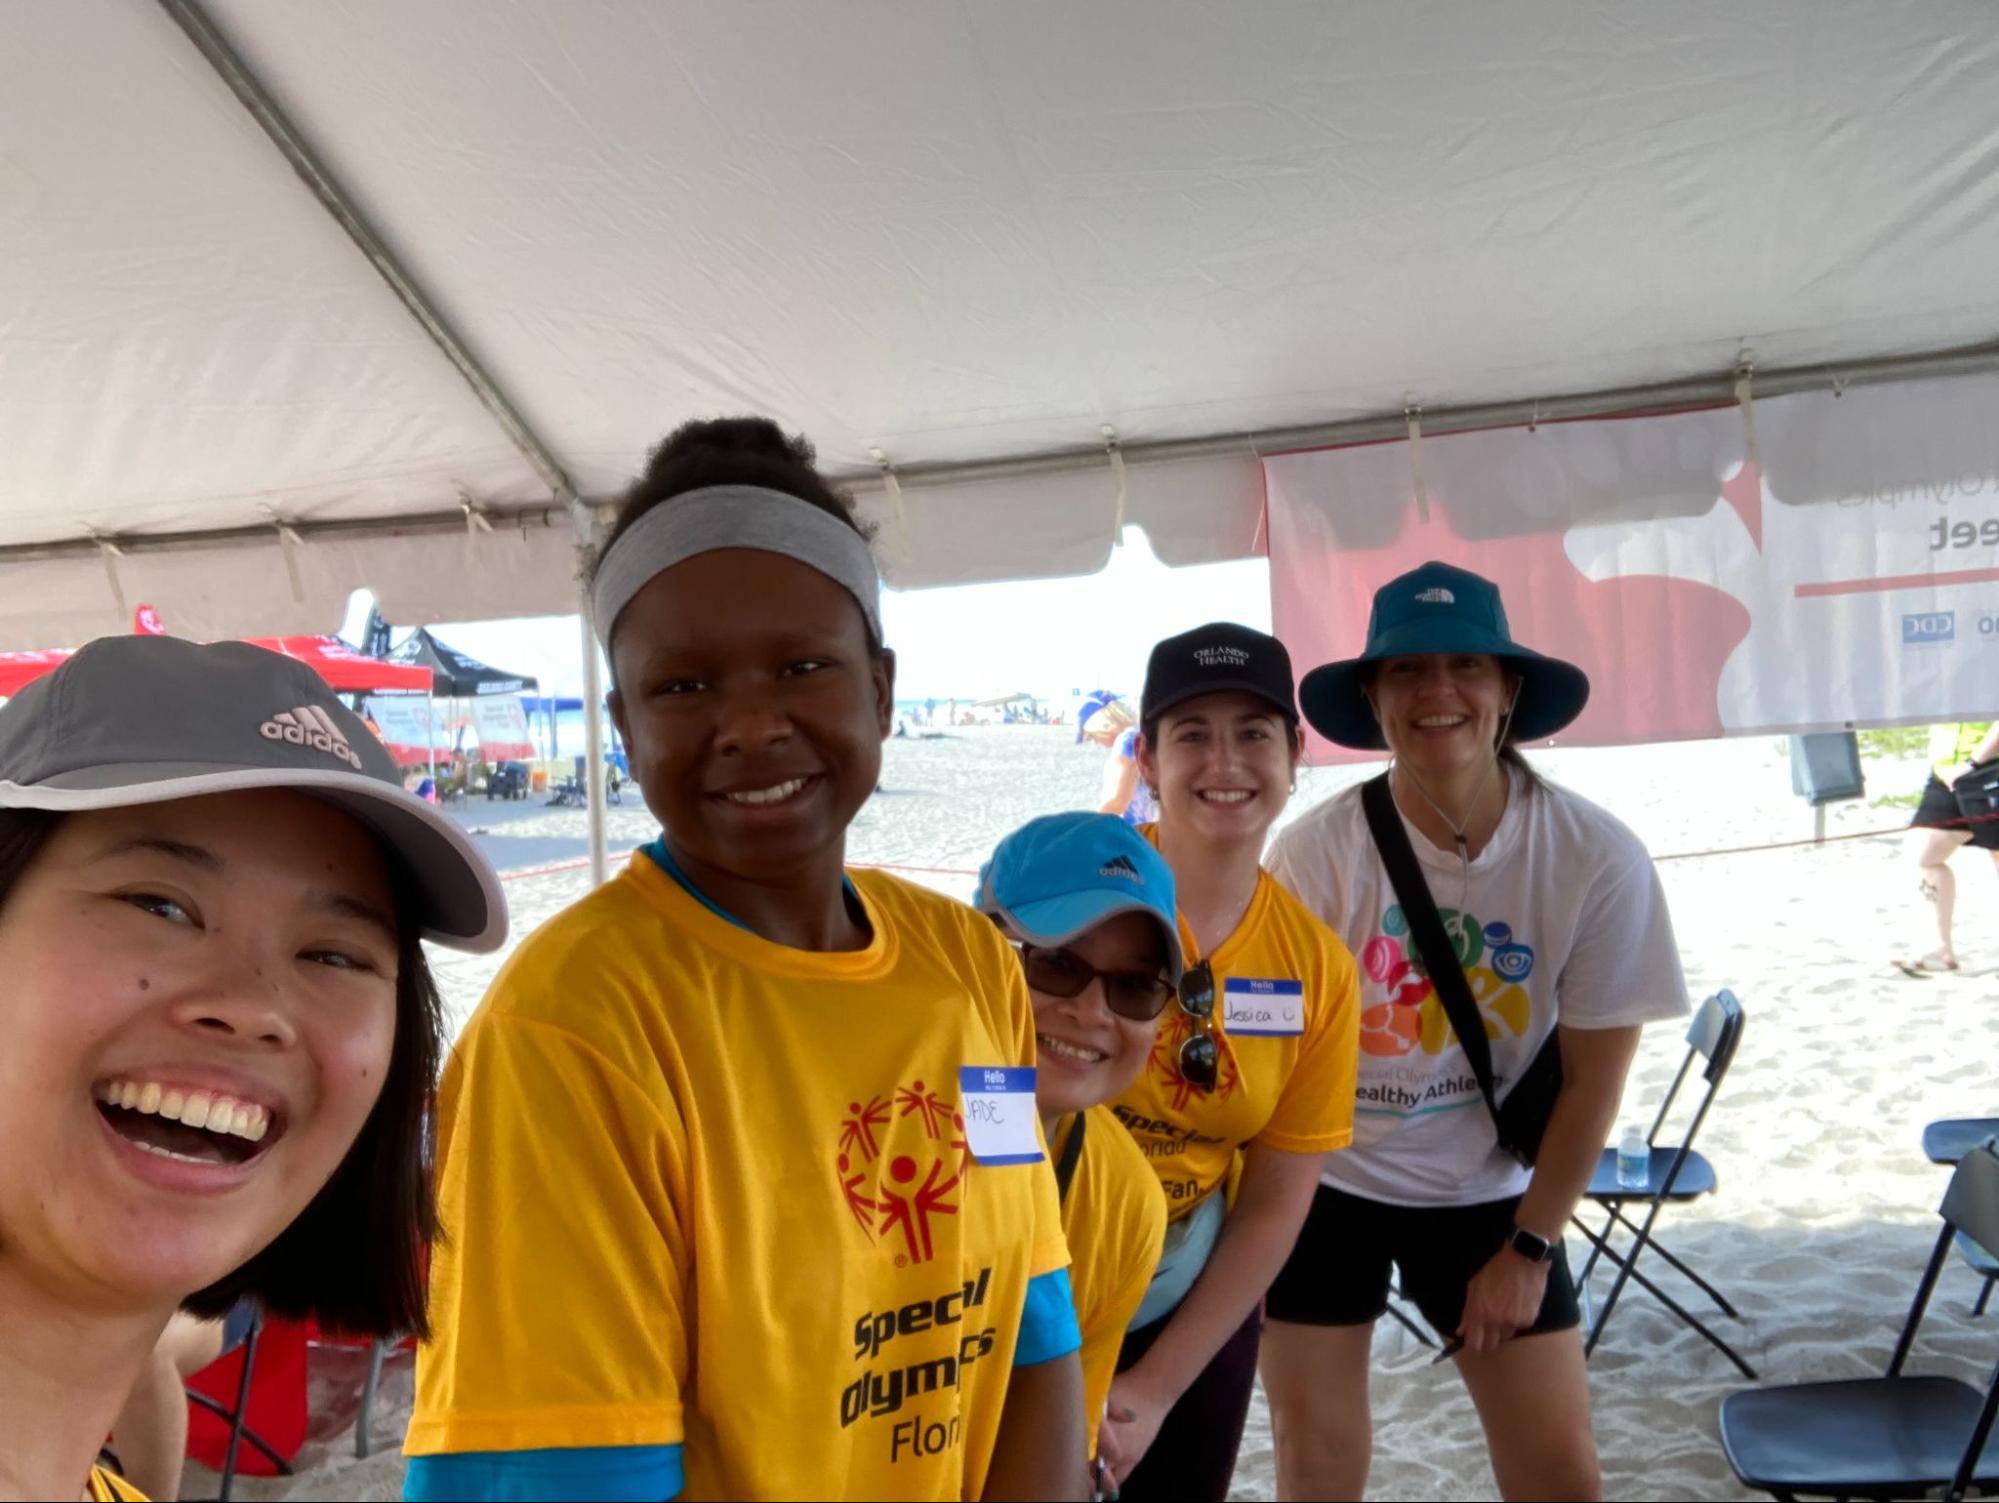 From left to right: volunteers Amy, Jade, Nathalie, Jessica, and Jennifer.